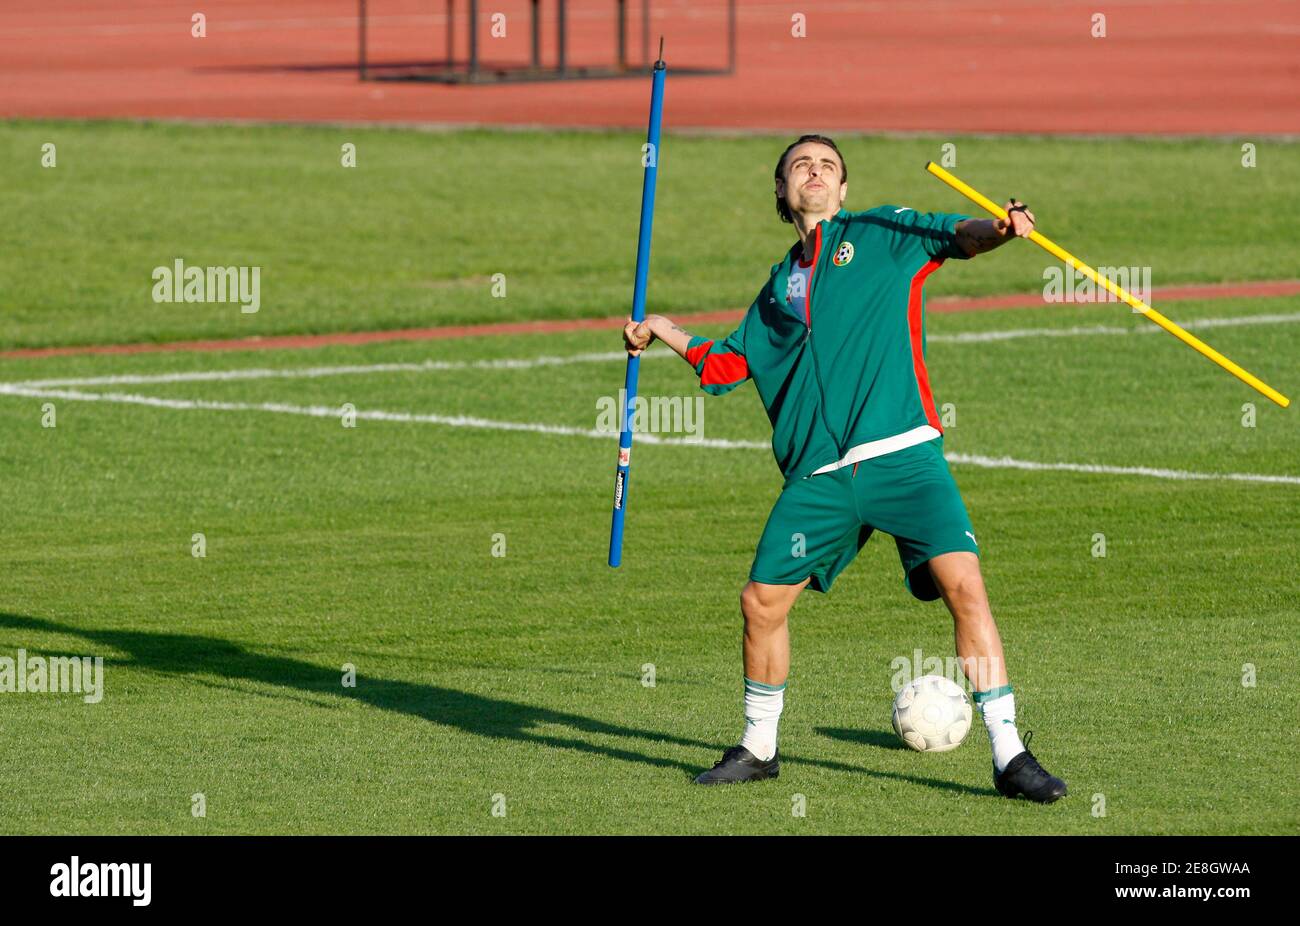 Captain of the Bulgarian national soccer team Dimitar Berbatov throws a wooden stick during team's practice at Vassil Levski stadium in Sofia, October 6, 2009. Bulgaria will meet Cyprus on Saturday and Georgia on Wednesday for their World Cup 2010 qualification matches.   REUTERS/Oleg Popov   (BULGARIA SPORT SOCCER) Stock Photo